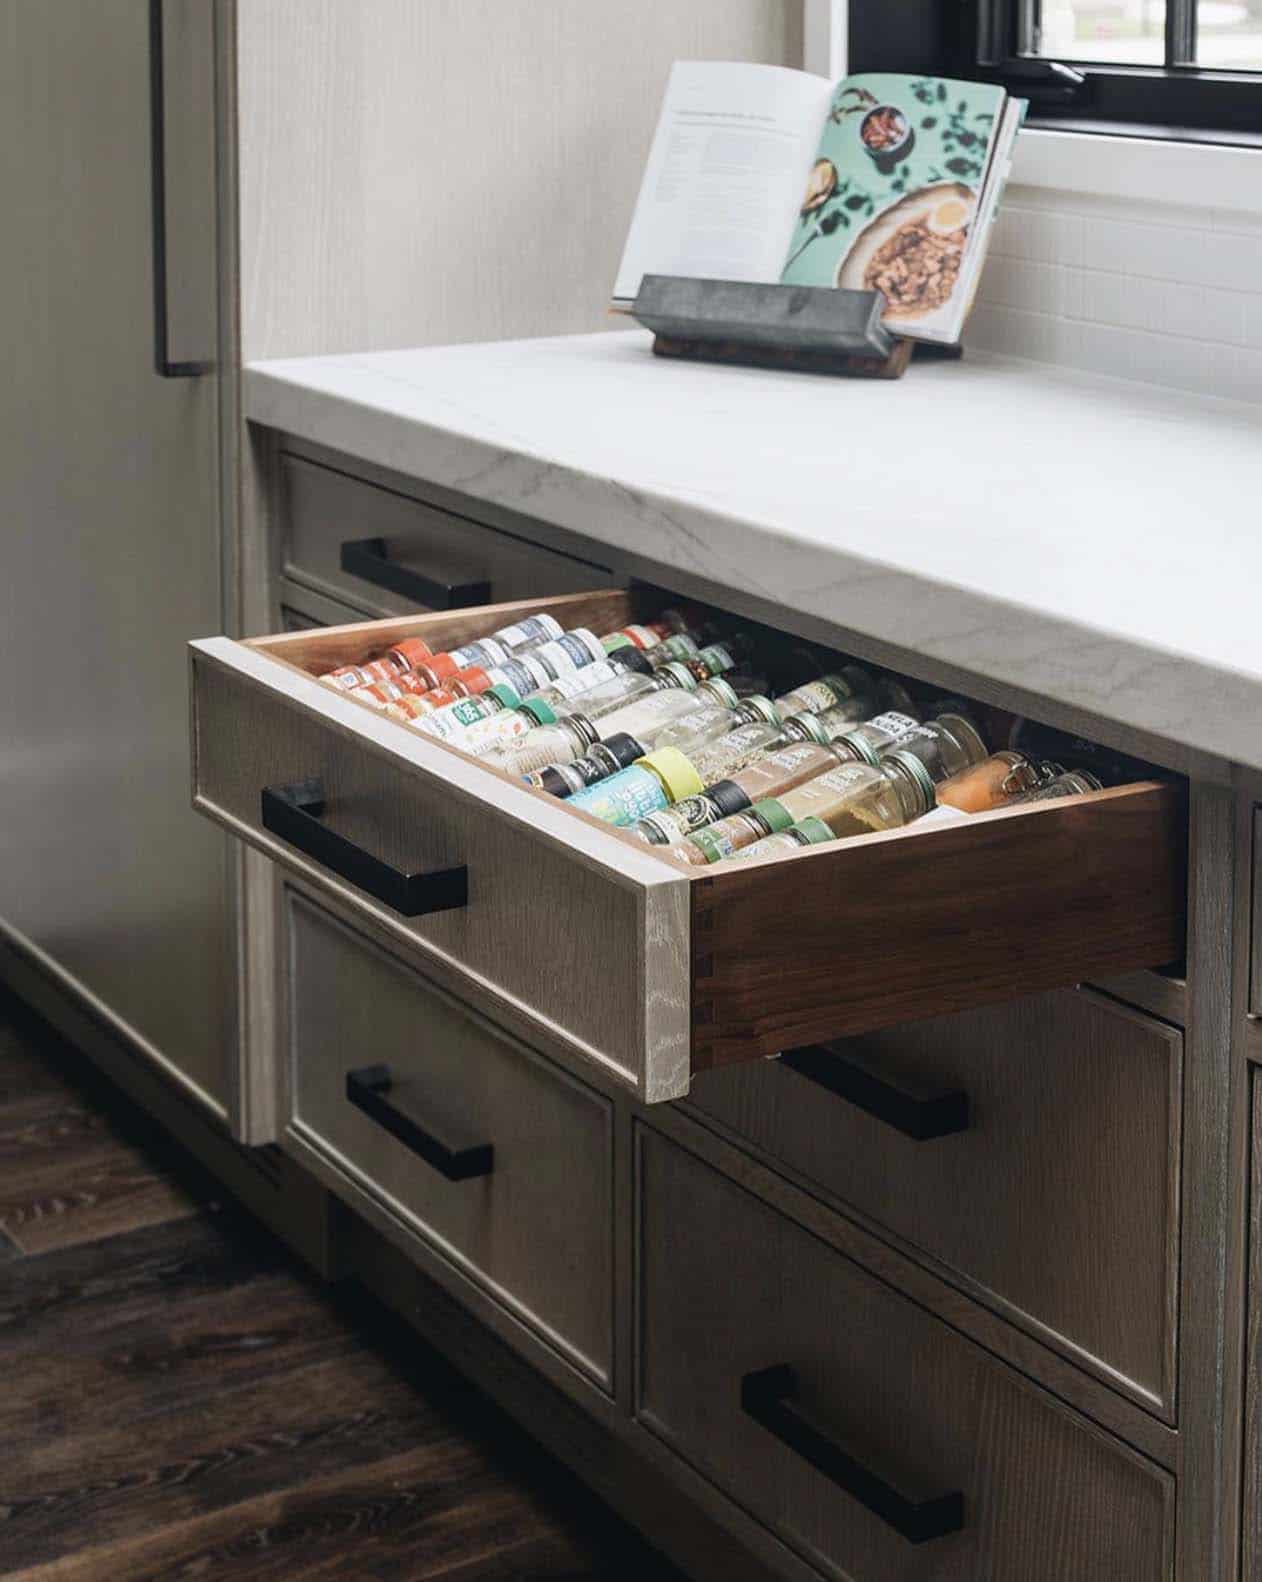 transitional-style-kitchen-spice-drawer